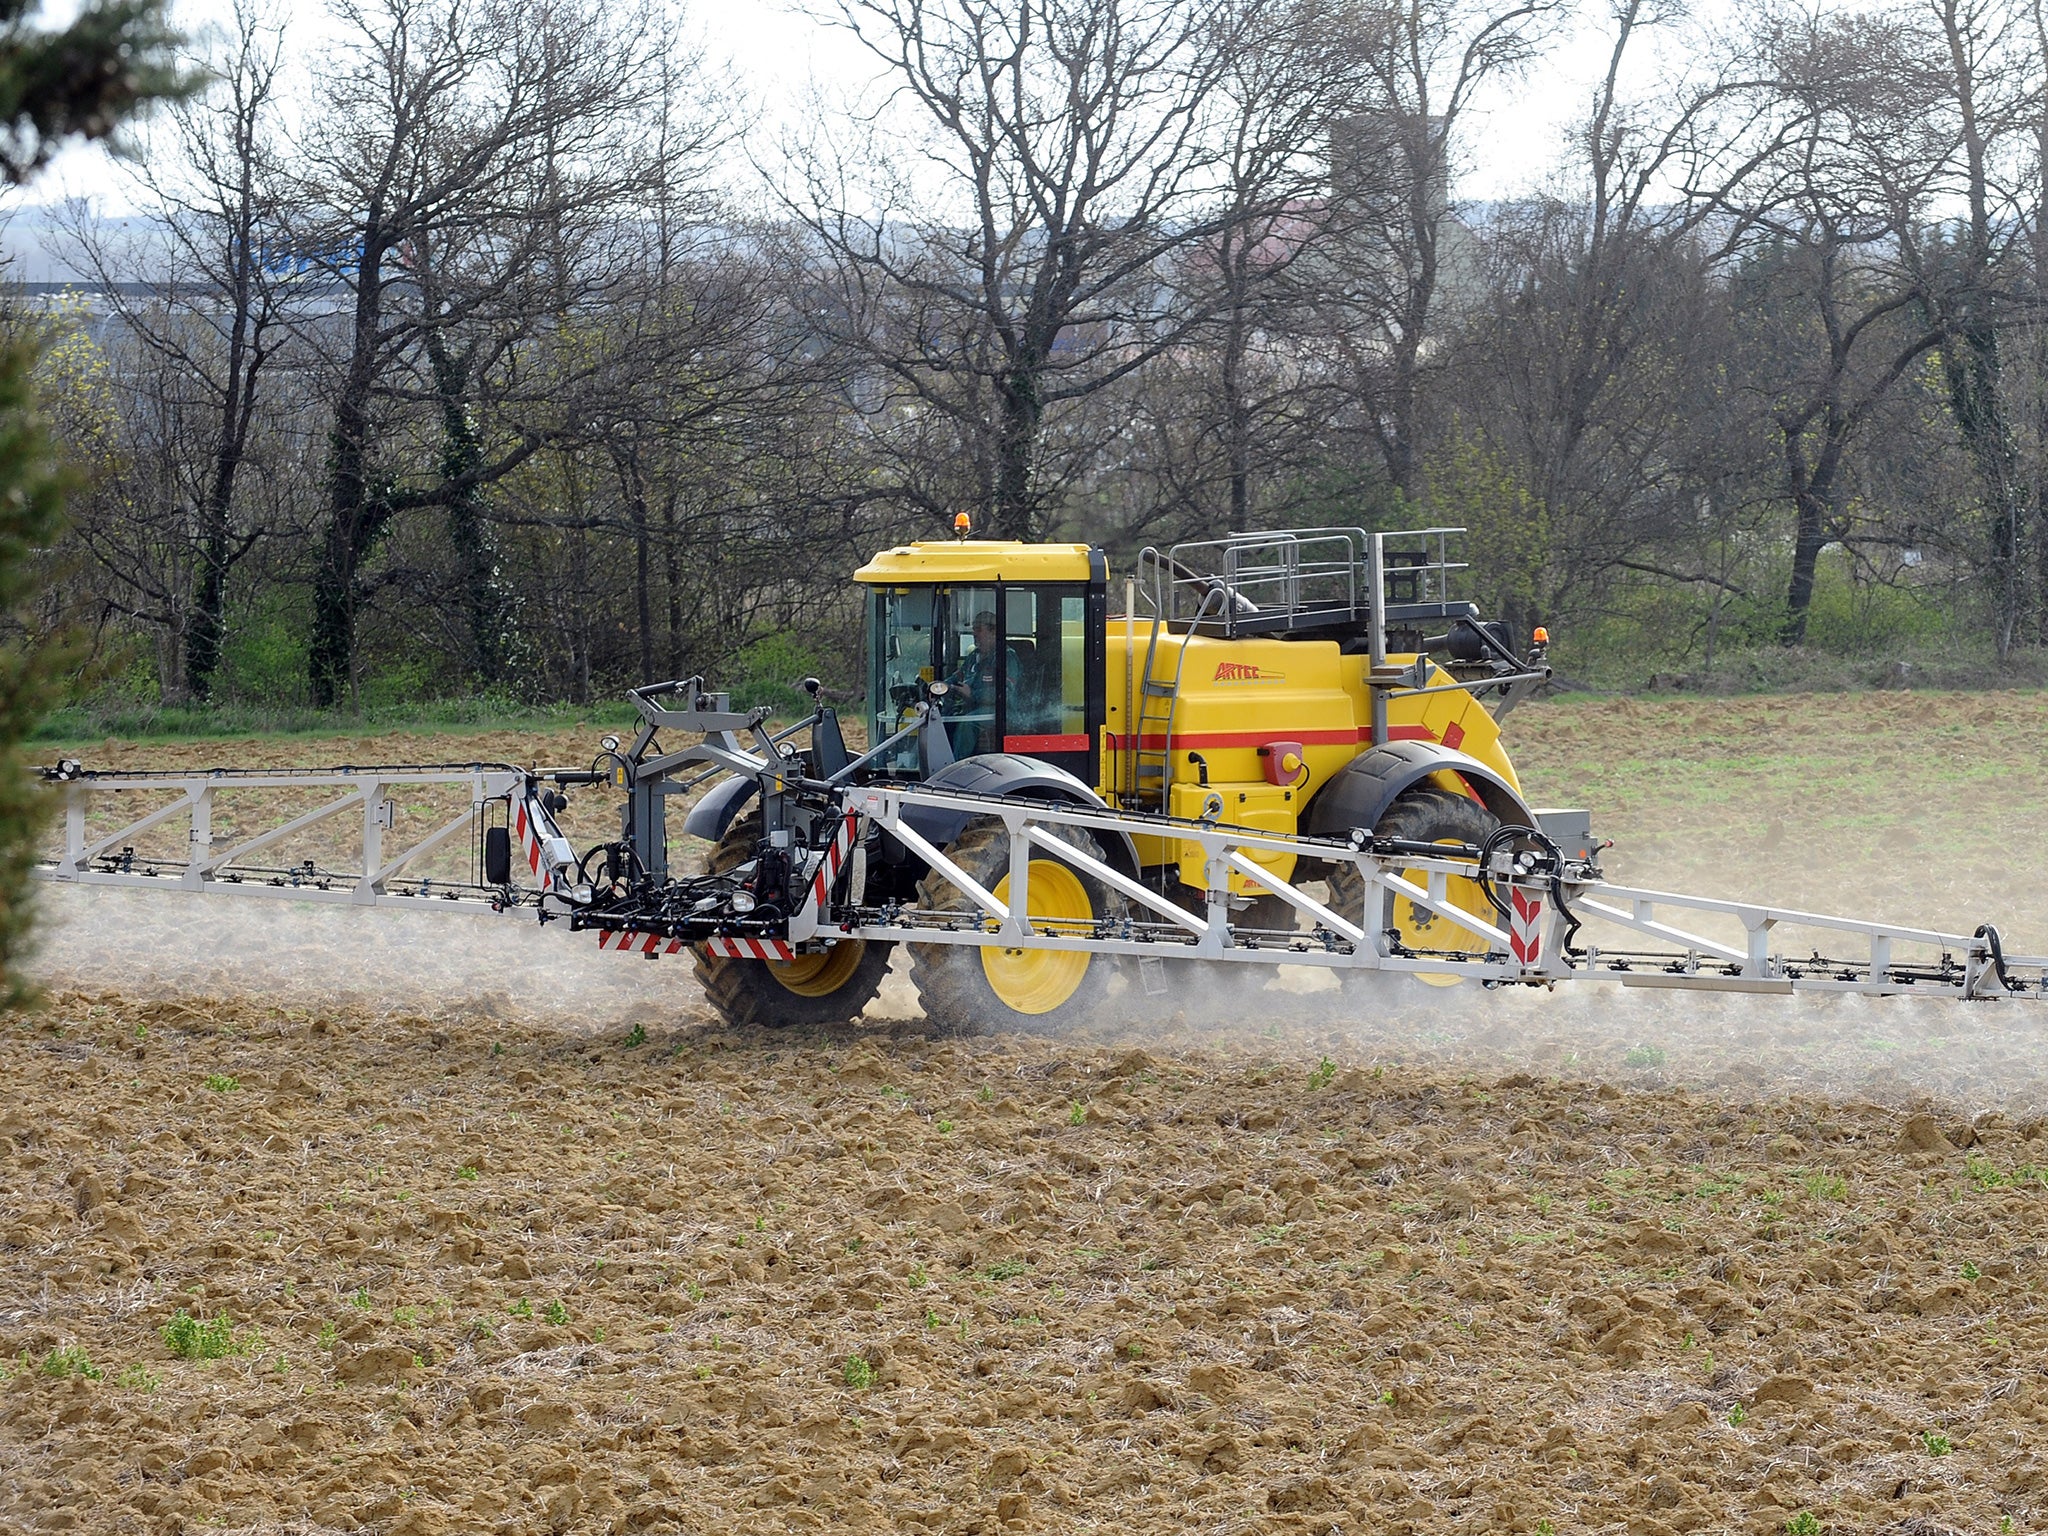 A field is sprayed with pesticides